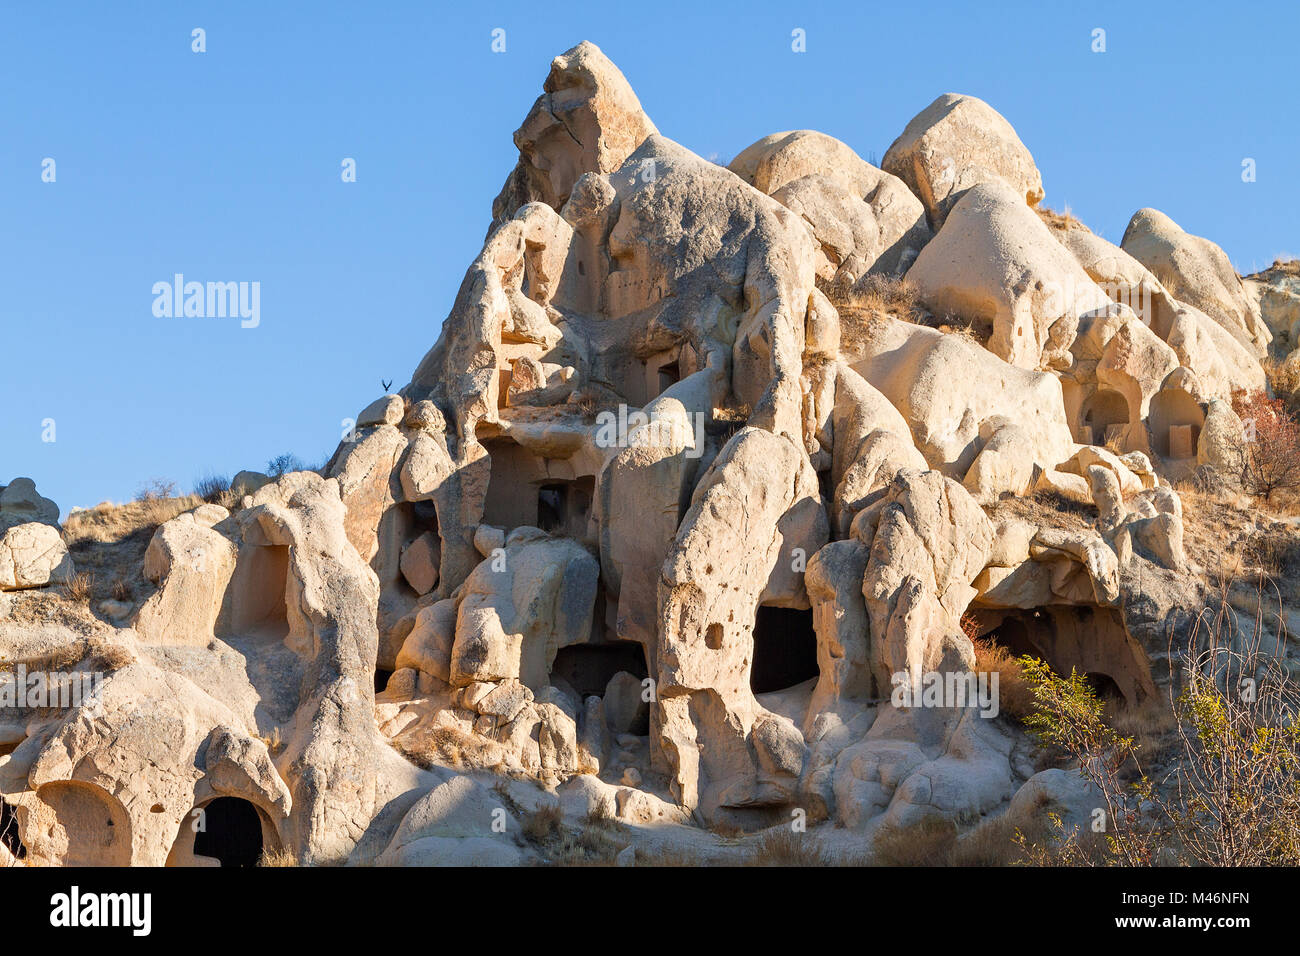 Rock formations and cave dwellings in Cappadocia, Turkey. Stock Photo